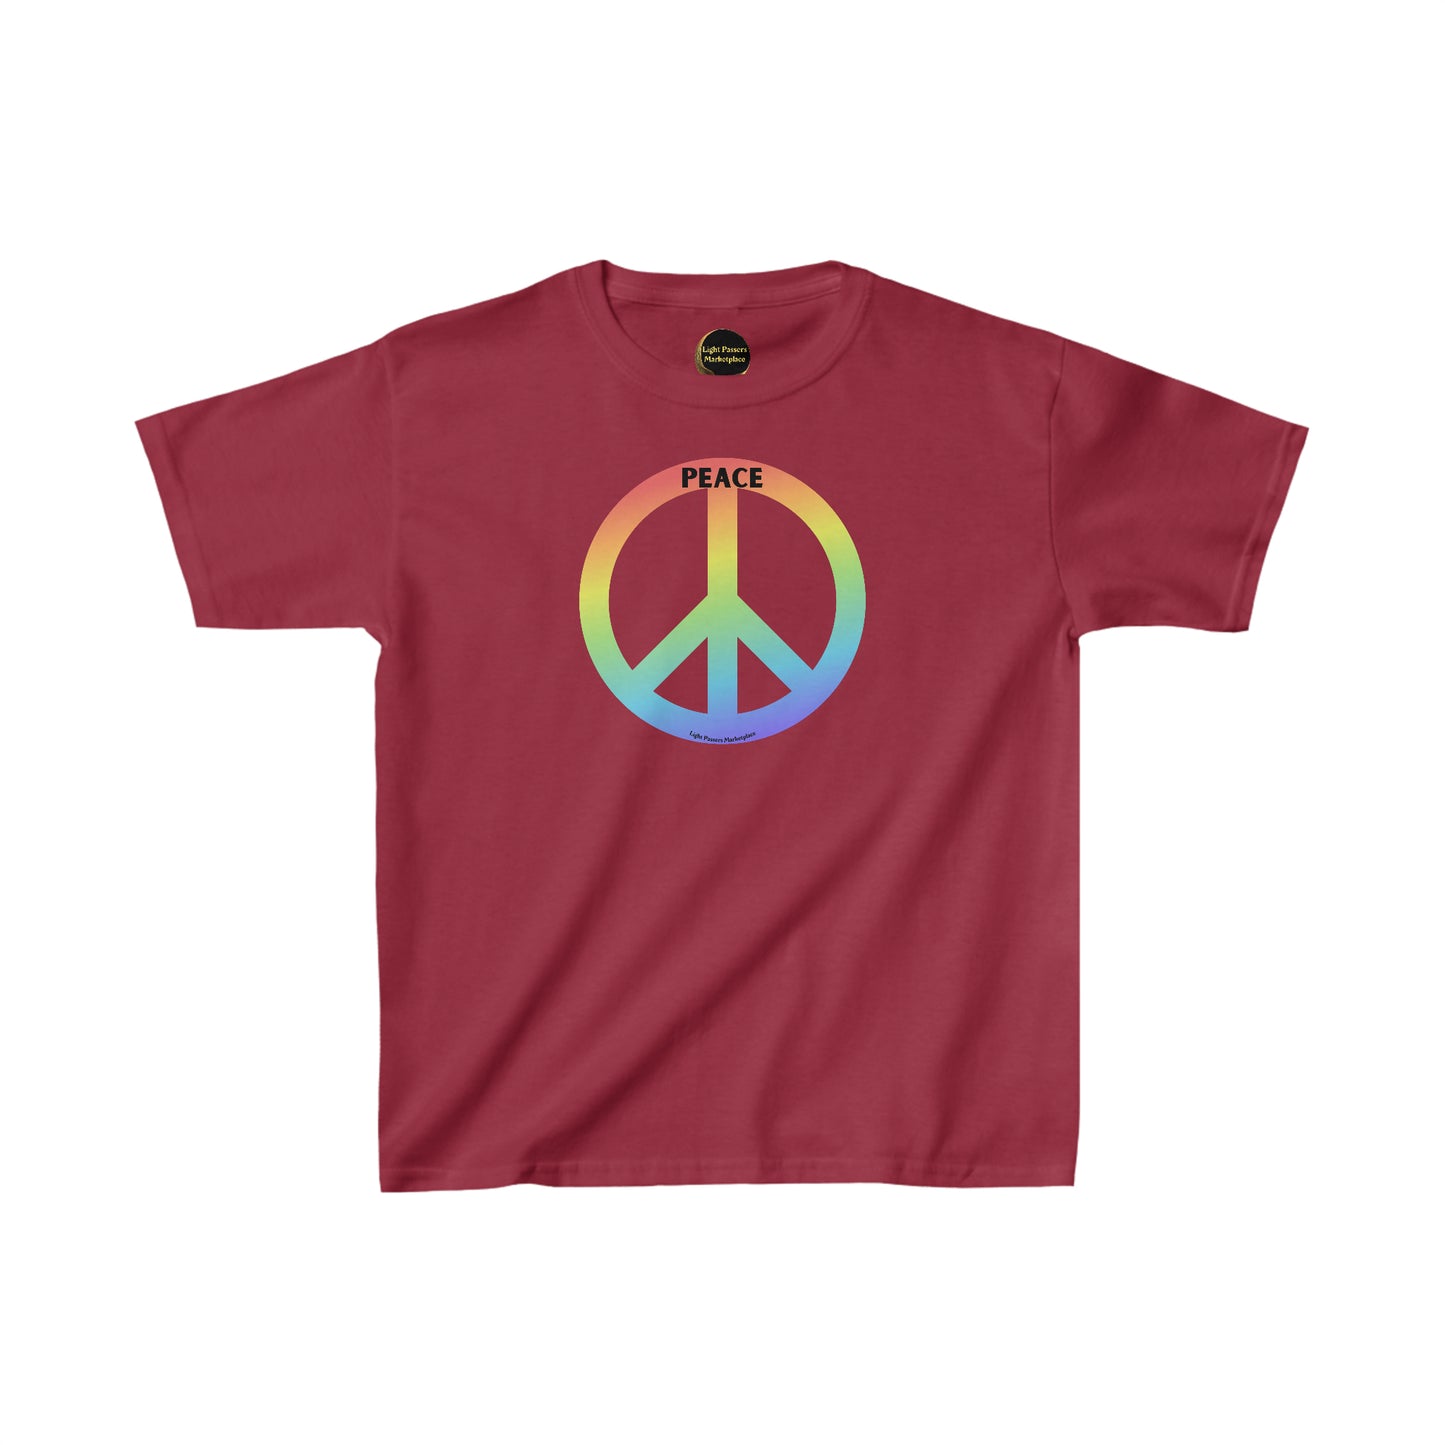 Light Passers Marketplace Peace Sign Color Youth Cotton T-shirt Simple Messages, Mental Health